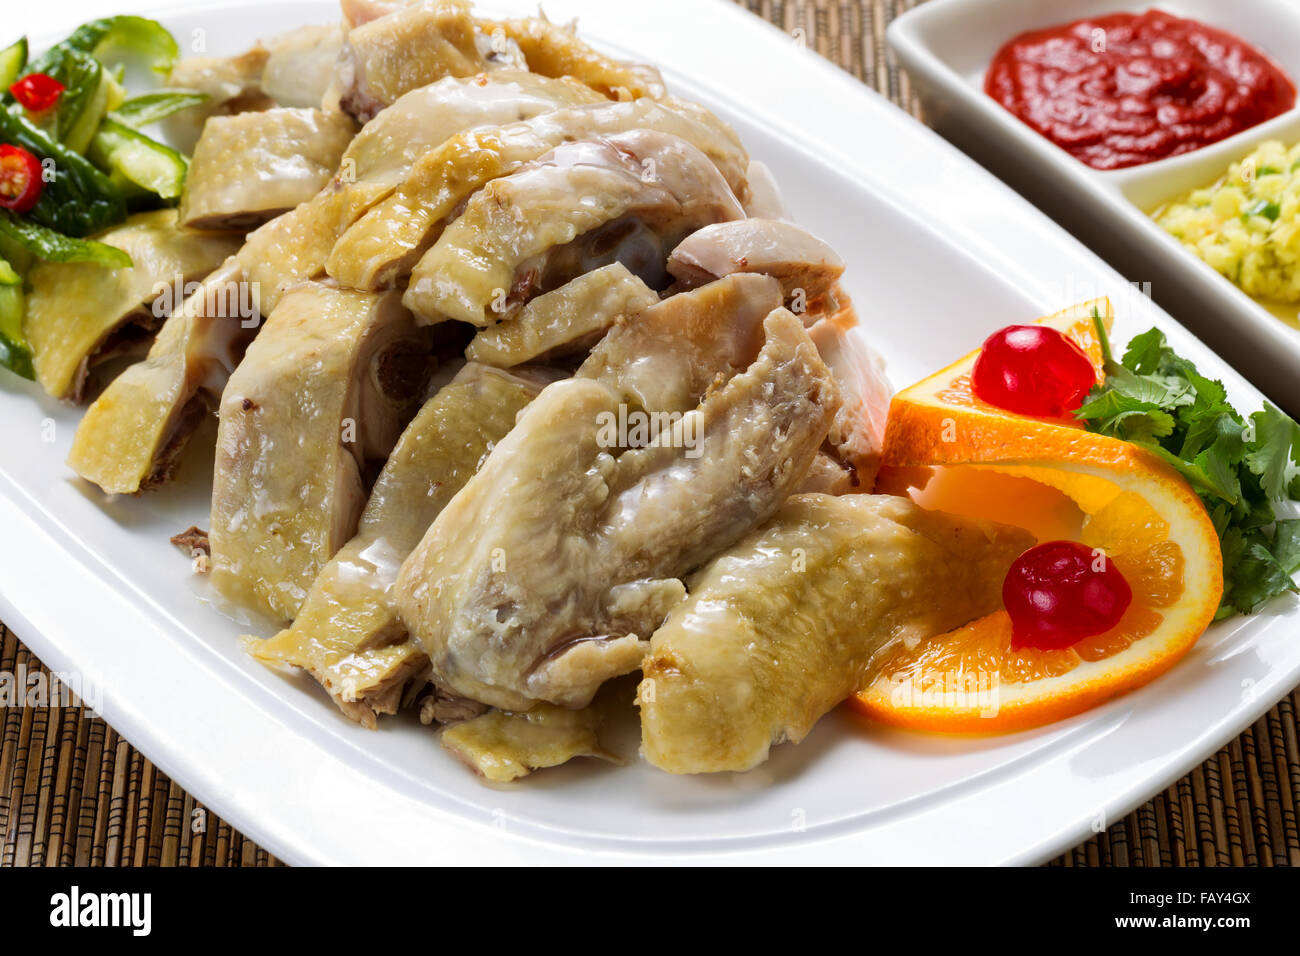 Close up front view of a succulent sliced chicken with dipping sauces and garnishes in background on bamboo mat. Stock Photo